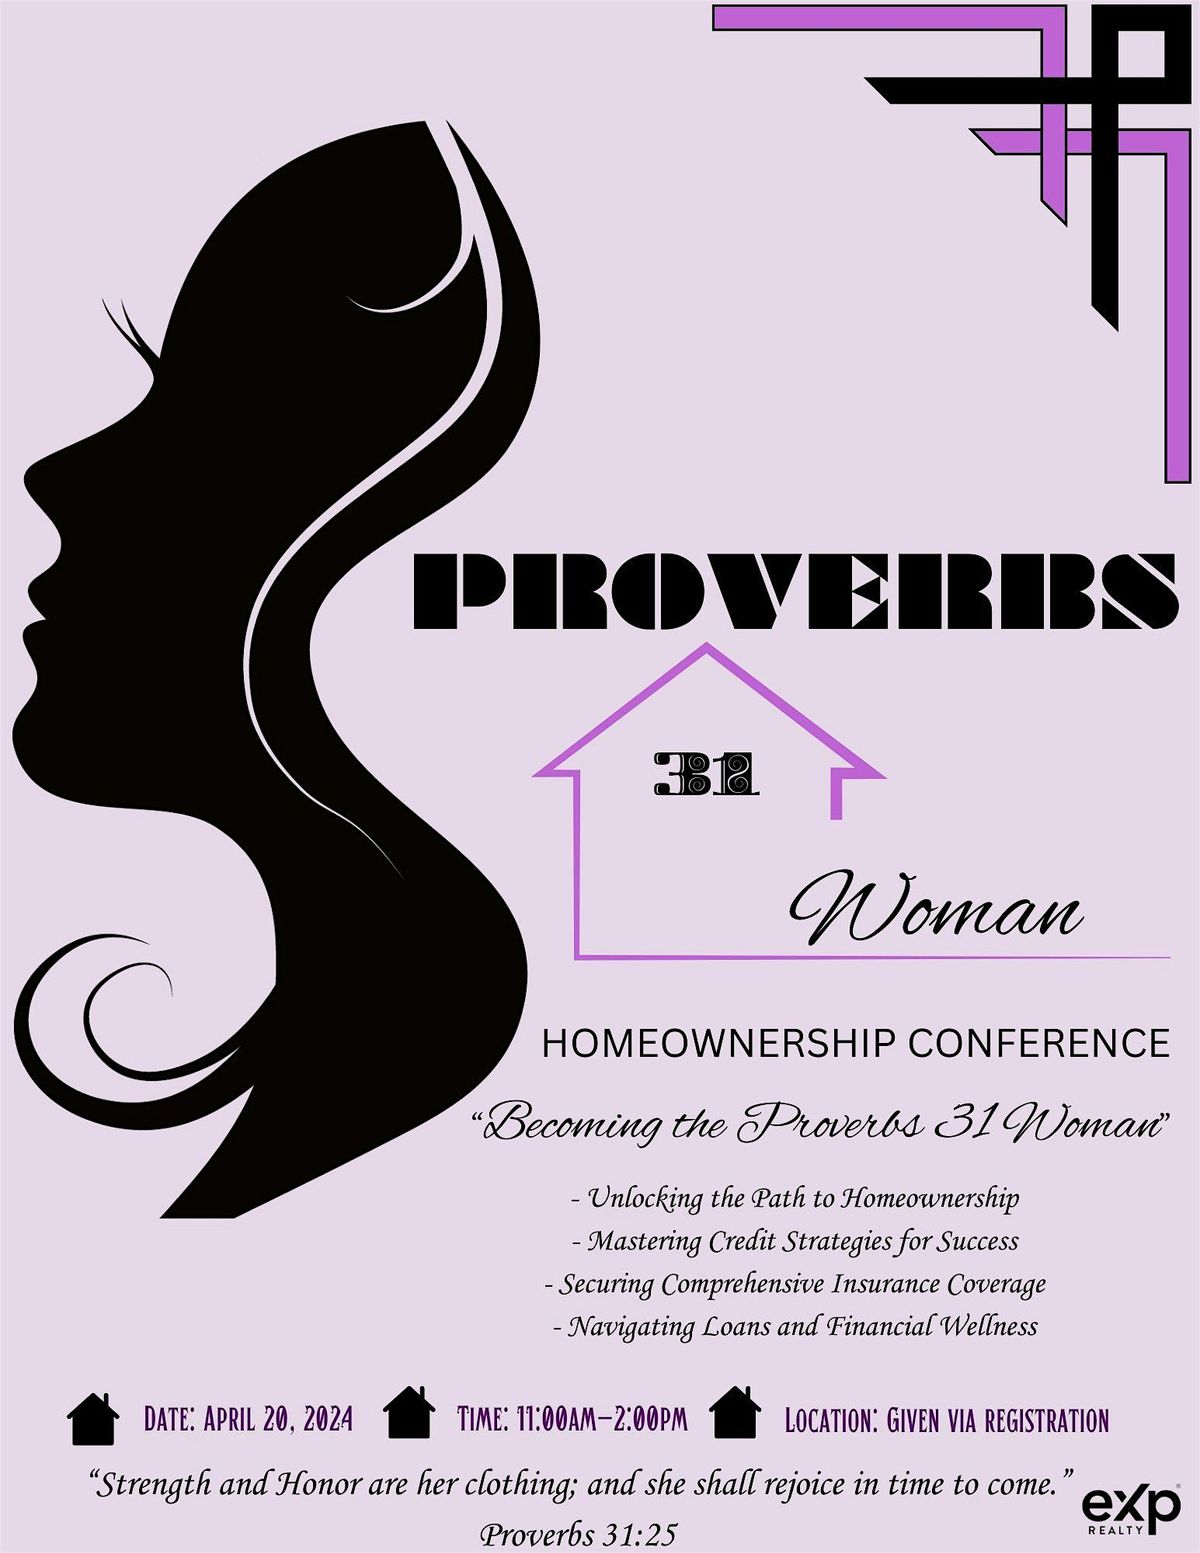 The Proverbs 31 Woman Homeownership Conference